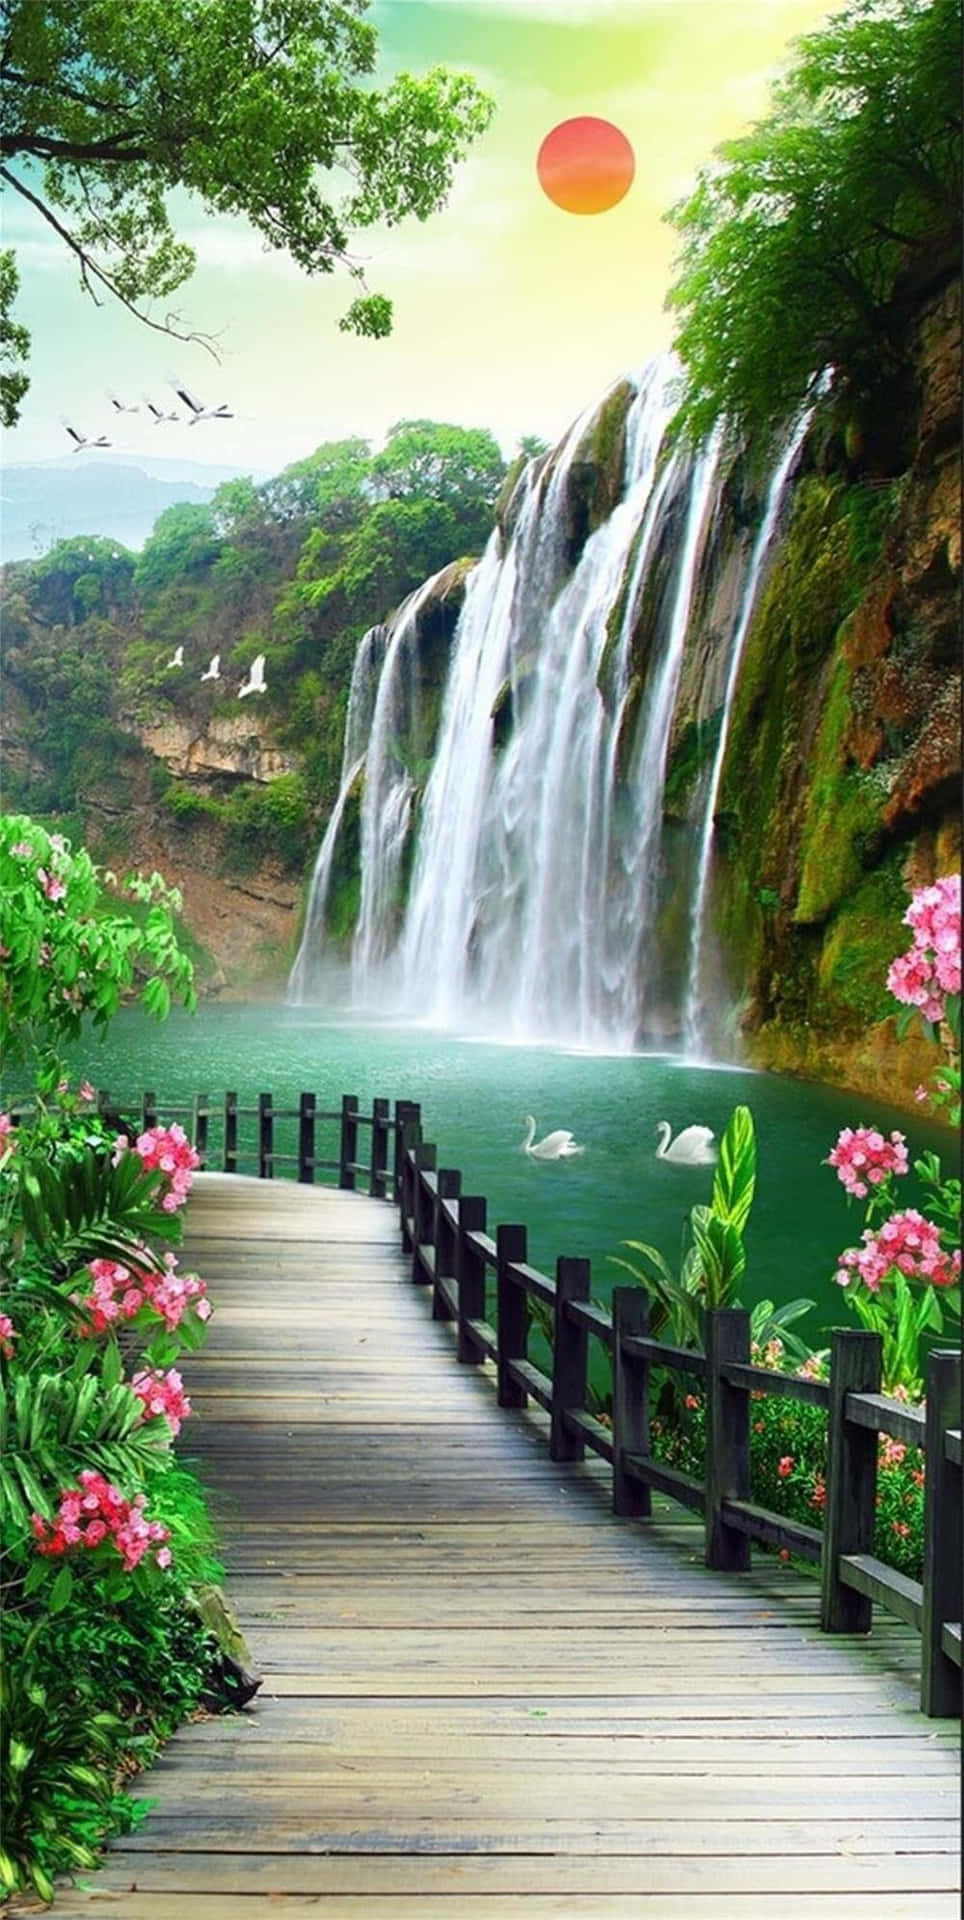 Mesmerizing 3D Waterfall in a Lush Green Forest Wallpaper